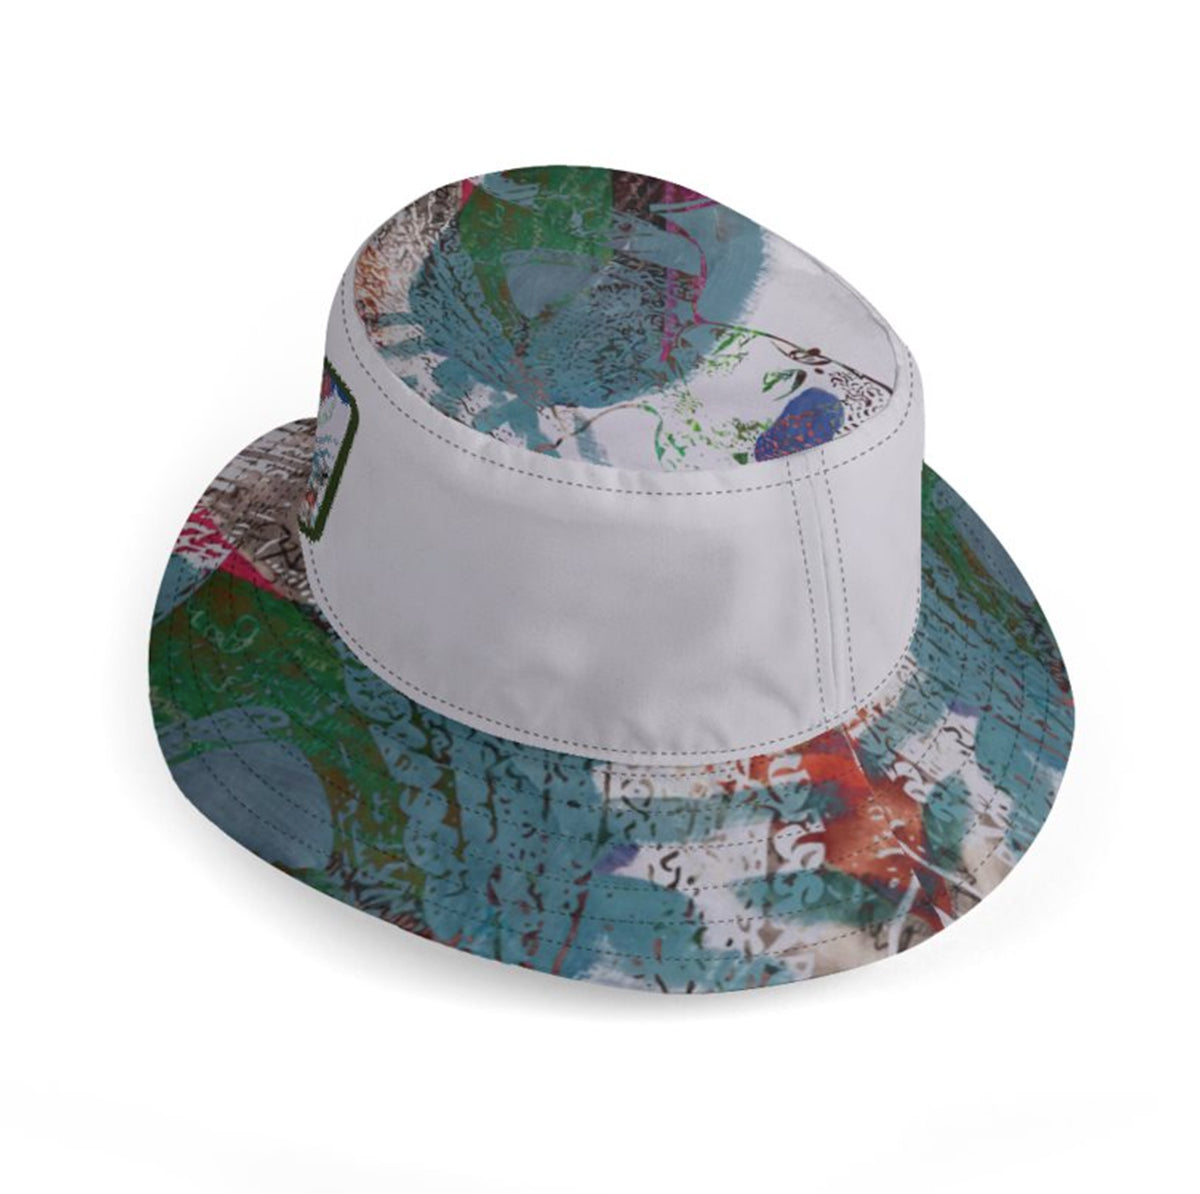 Play Your Hand…Watch Your Back #3 Bucket Hats